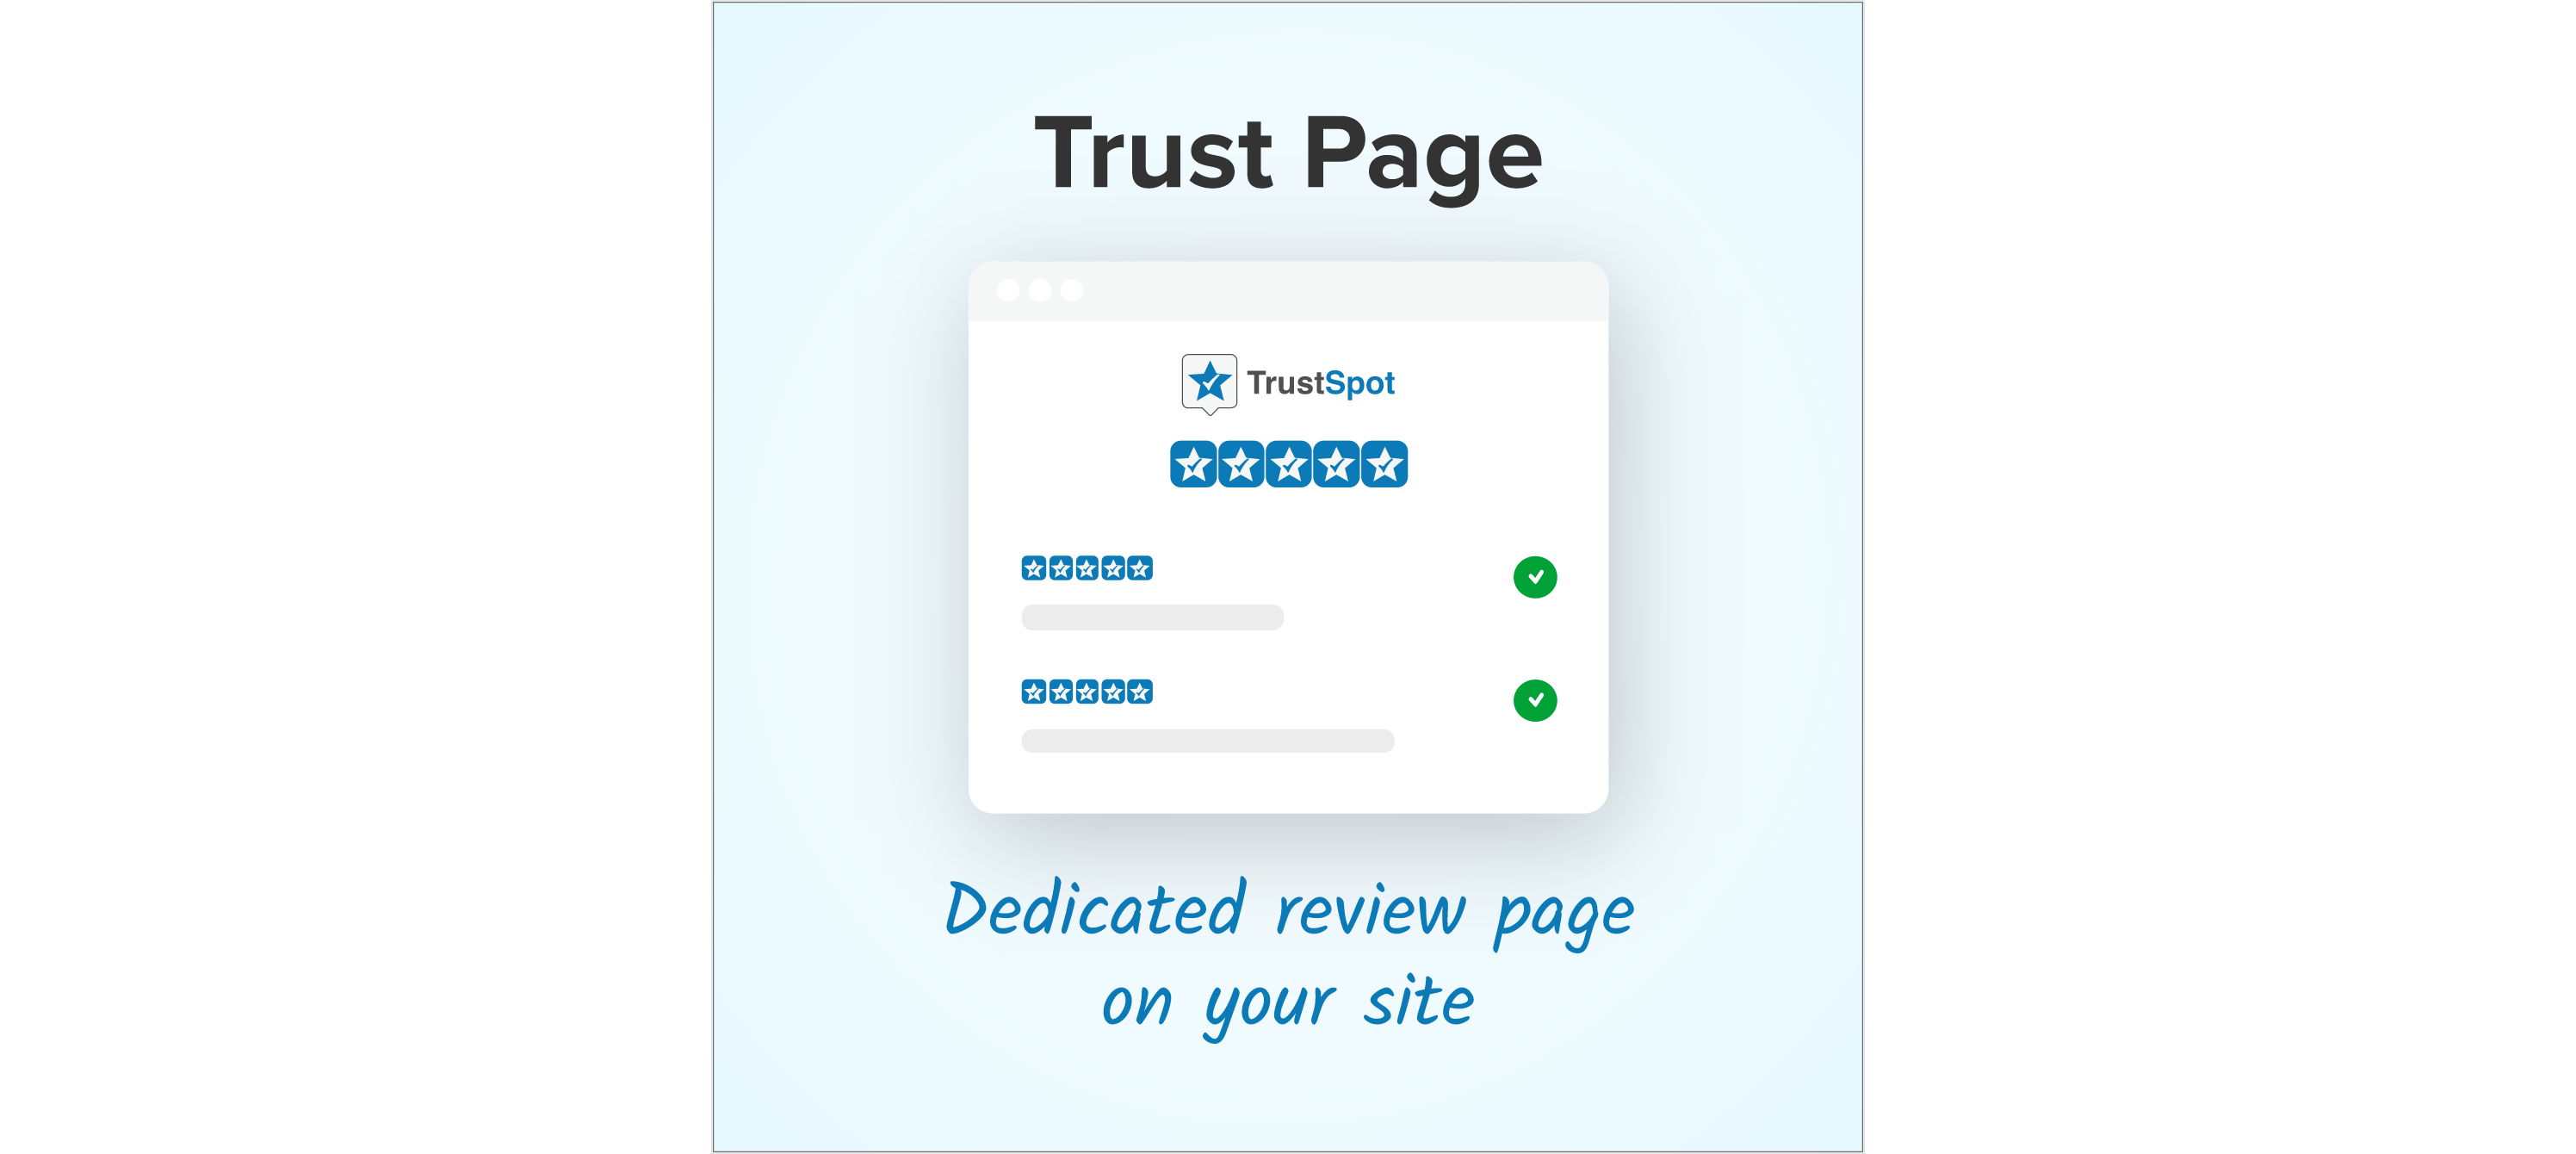 Dedicated review page on your site.